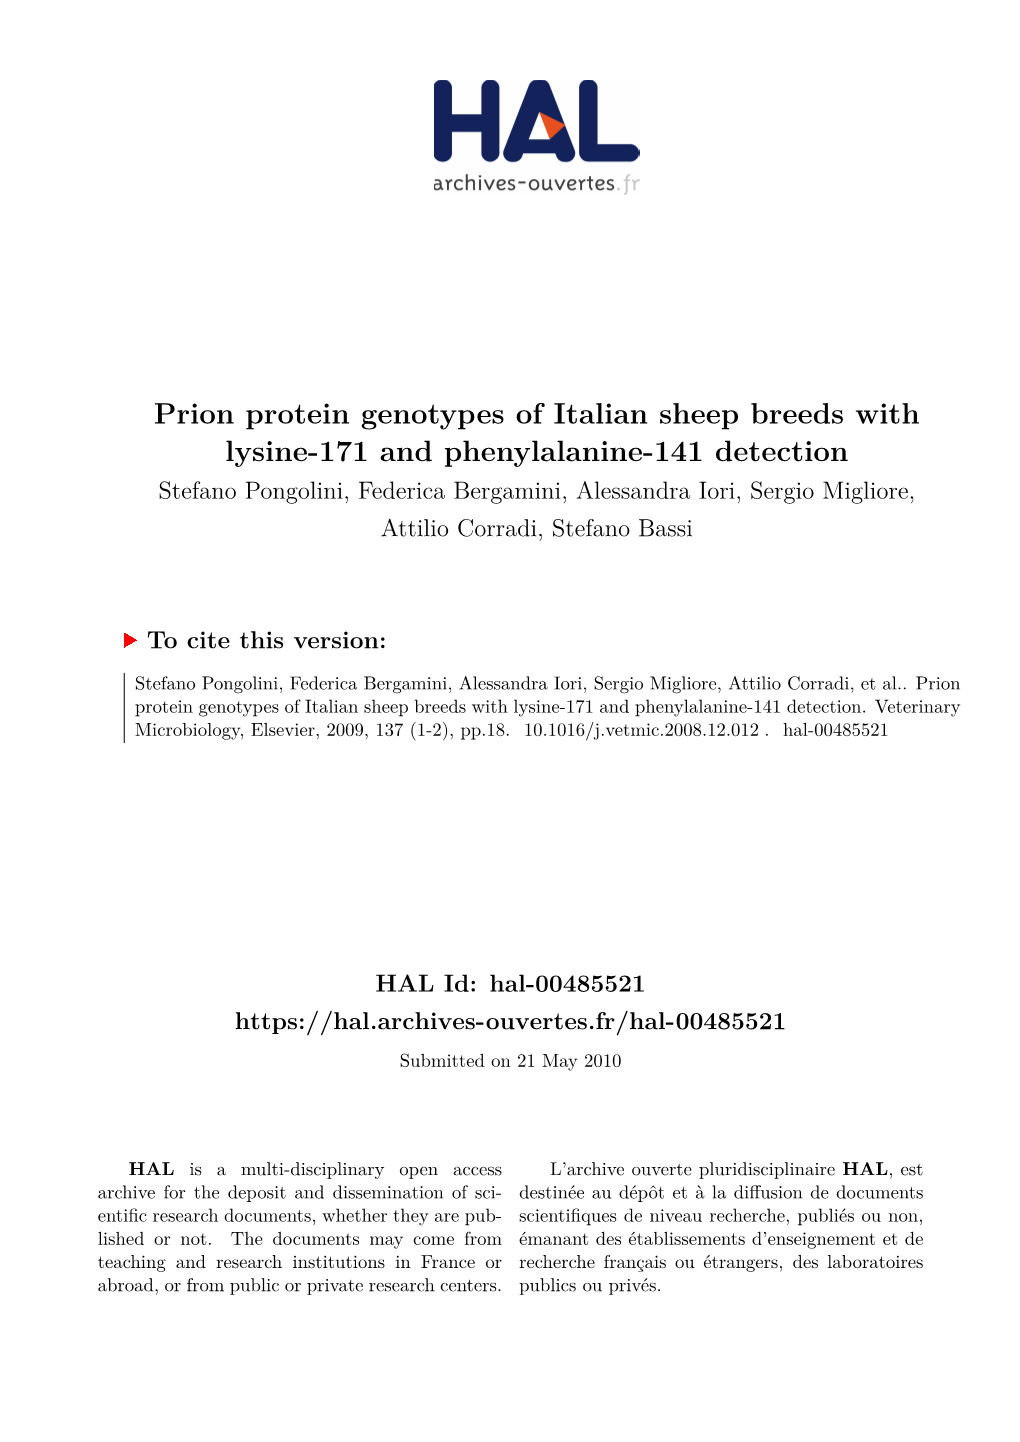 Prion Protein Genotypes of Italian Sheep Breeds with Lysine-171 And